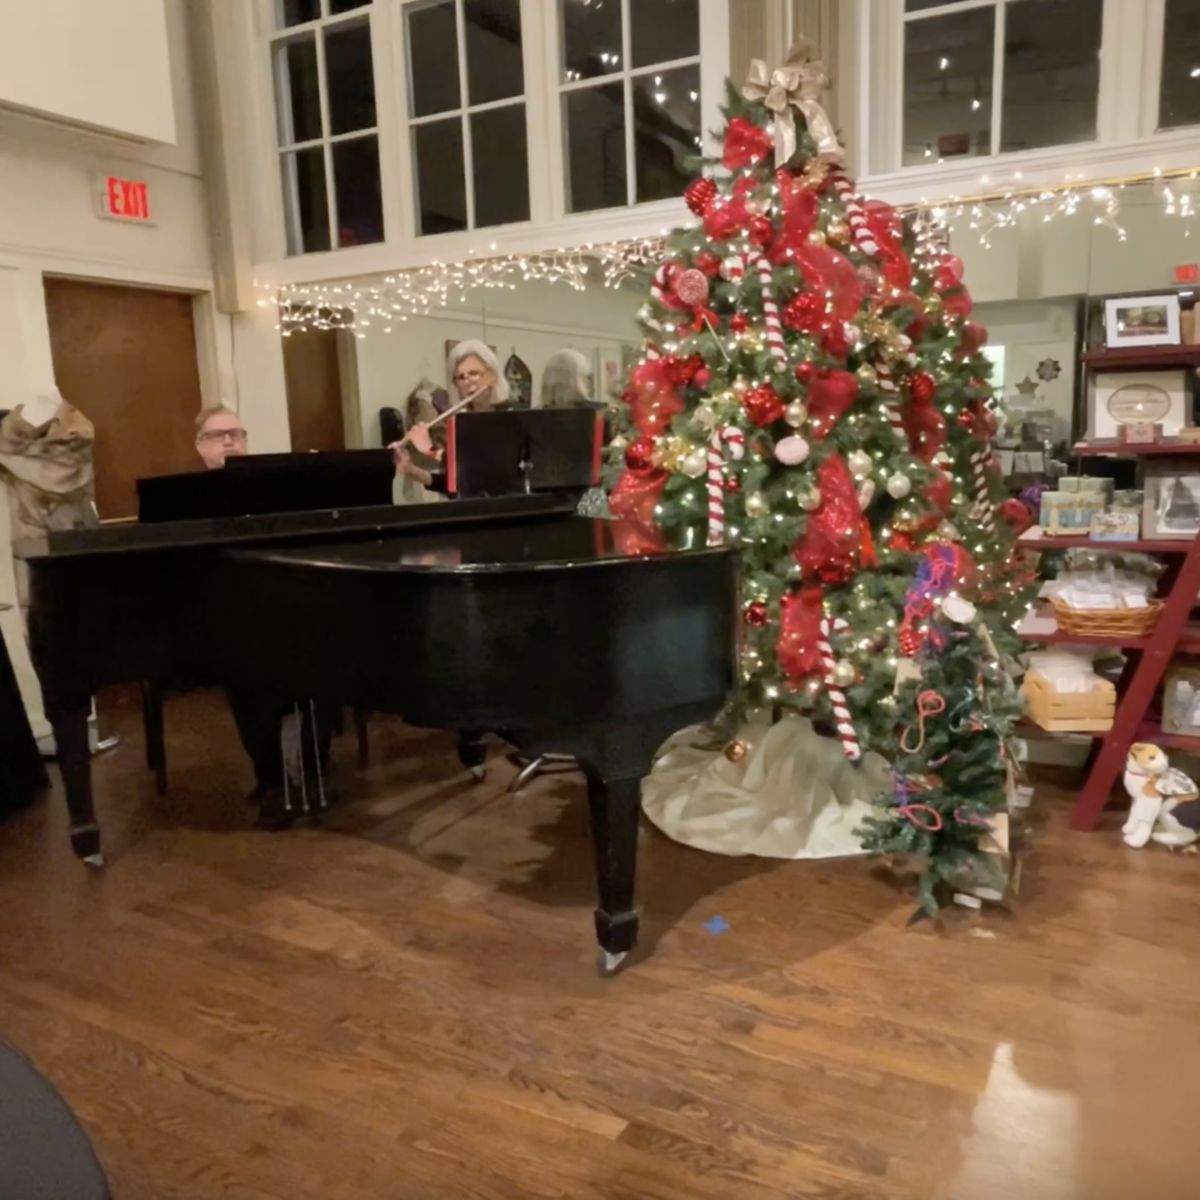 A woman plays the flute with a man at the piano next to a Christmas tree with red ribbons and lights